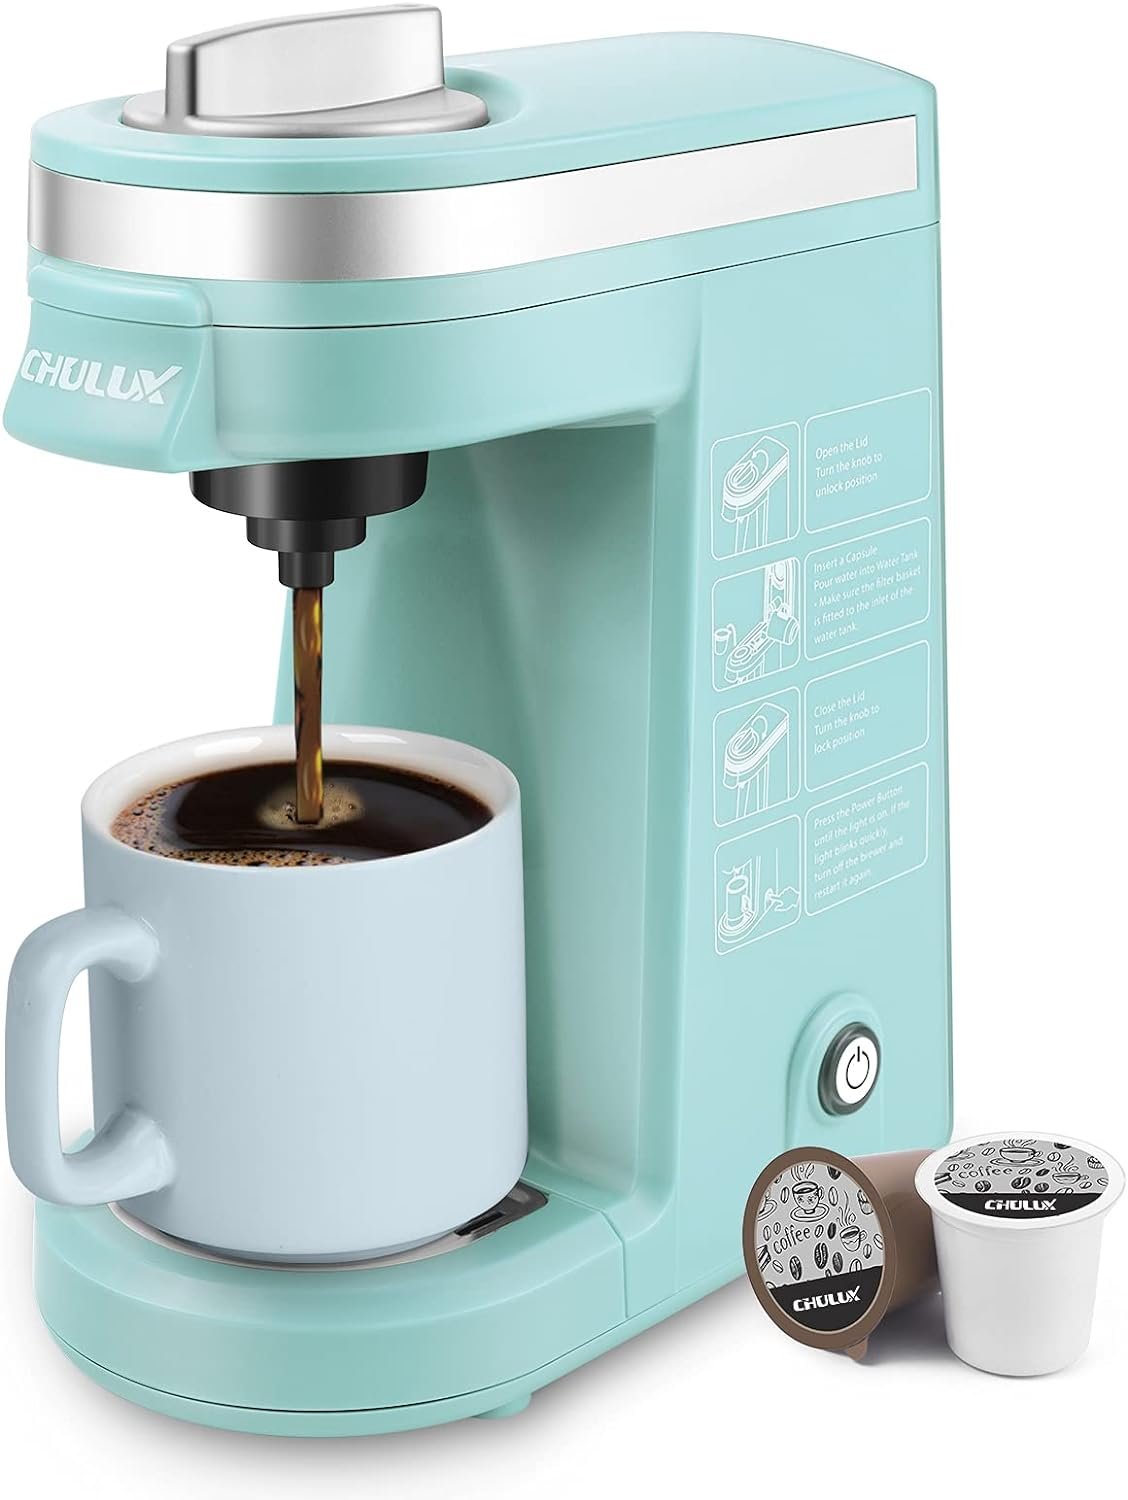 CHULUX Single Serve Coffee Maker, 12 Ounce Single Cup Coffee Machine, One Button Operation with Auto Shut-Off for Coffee or Tea, Cyan